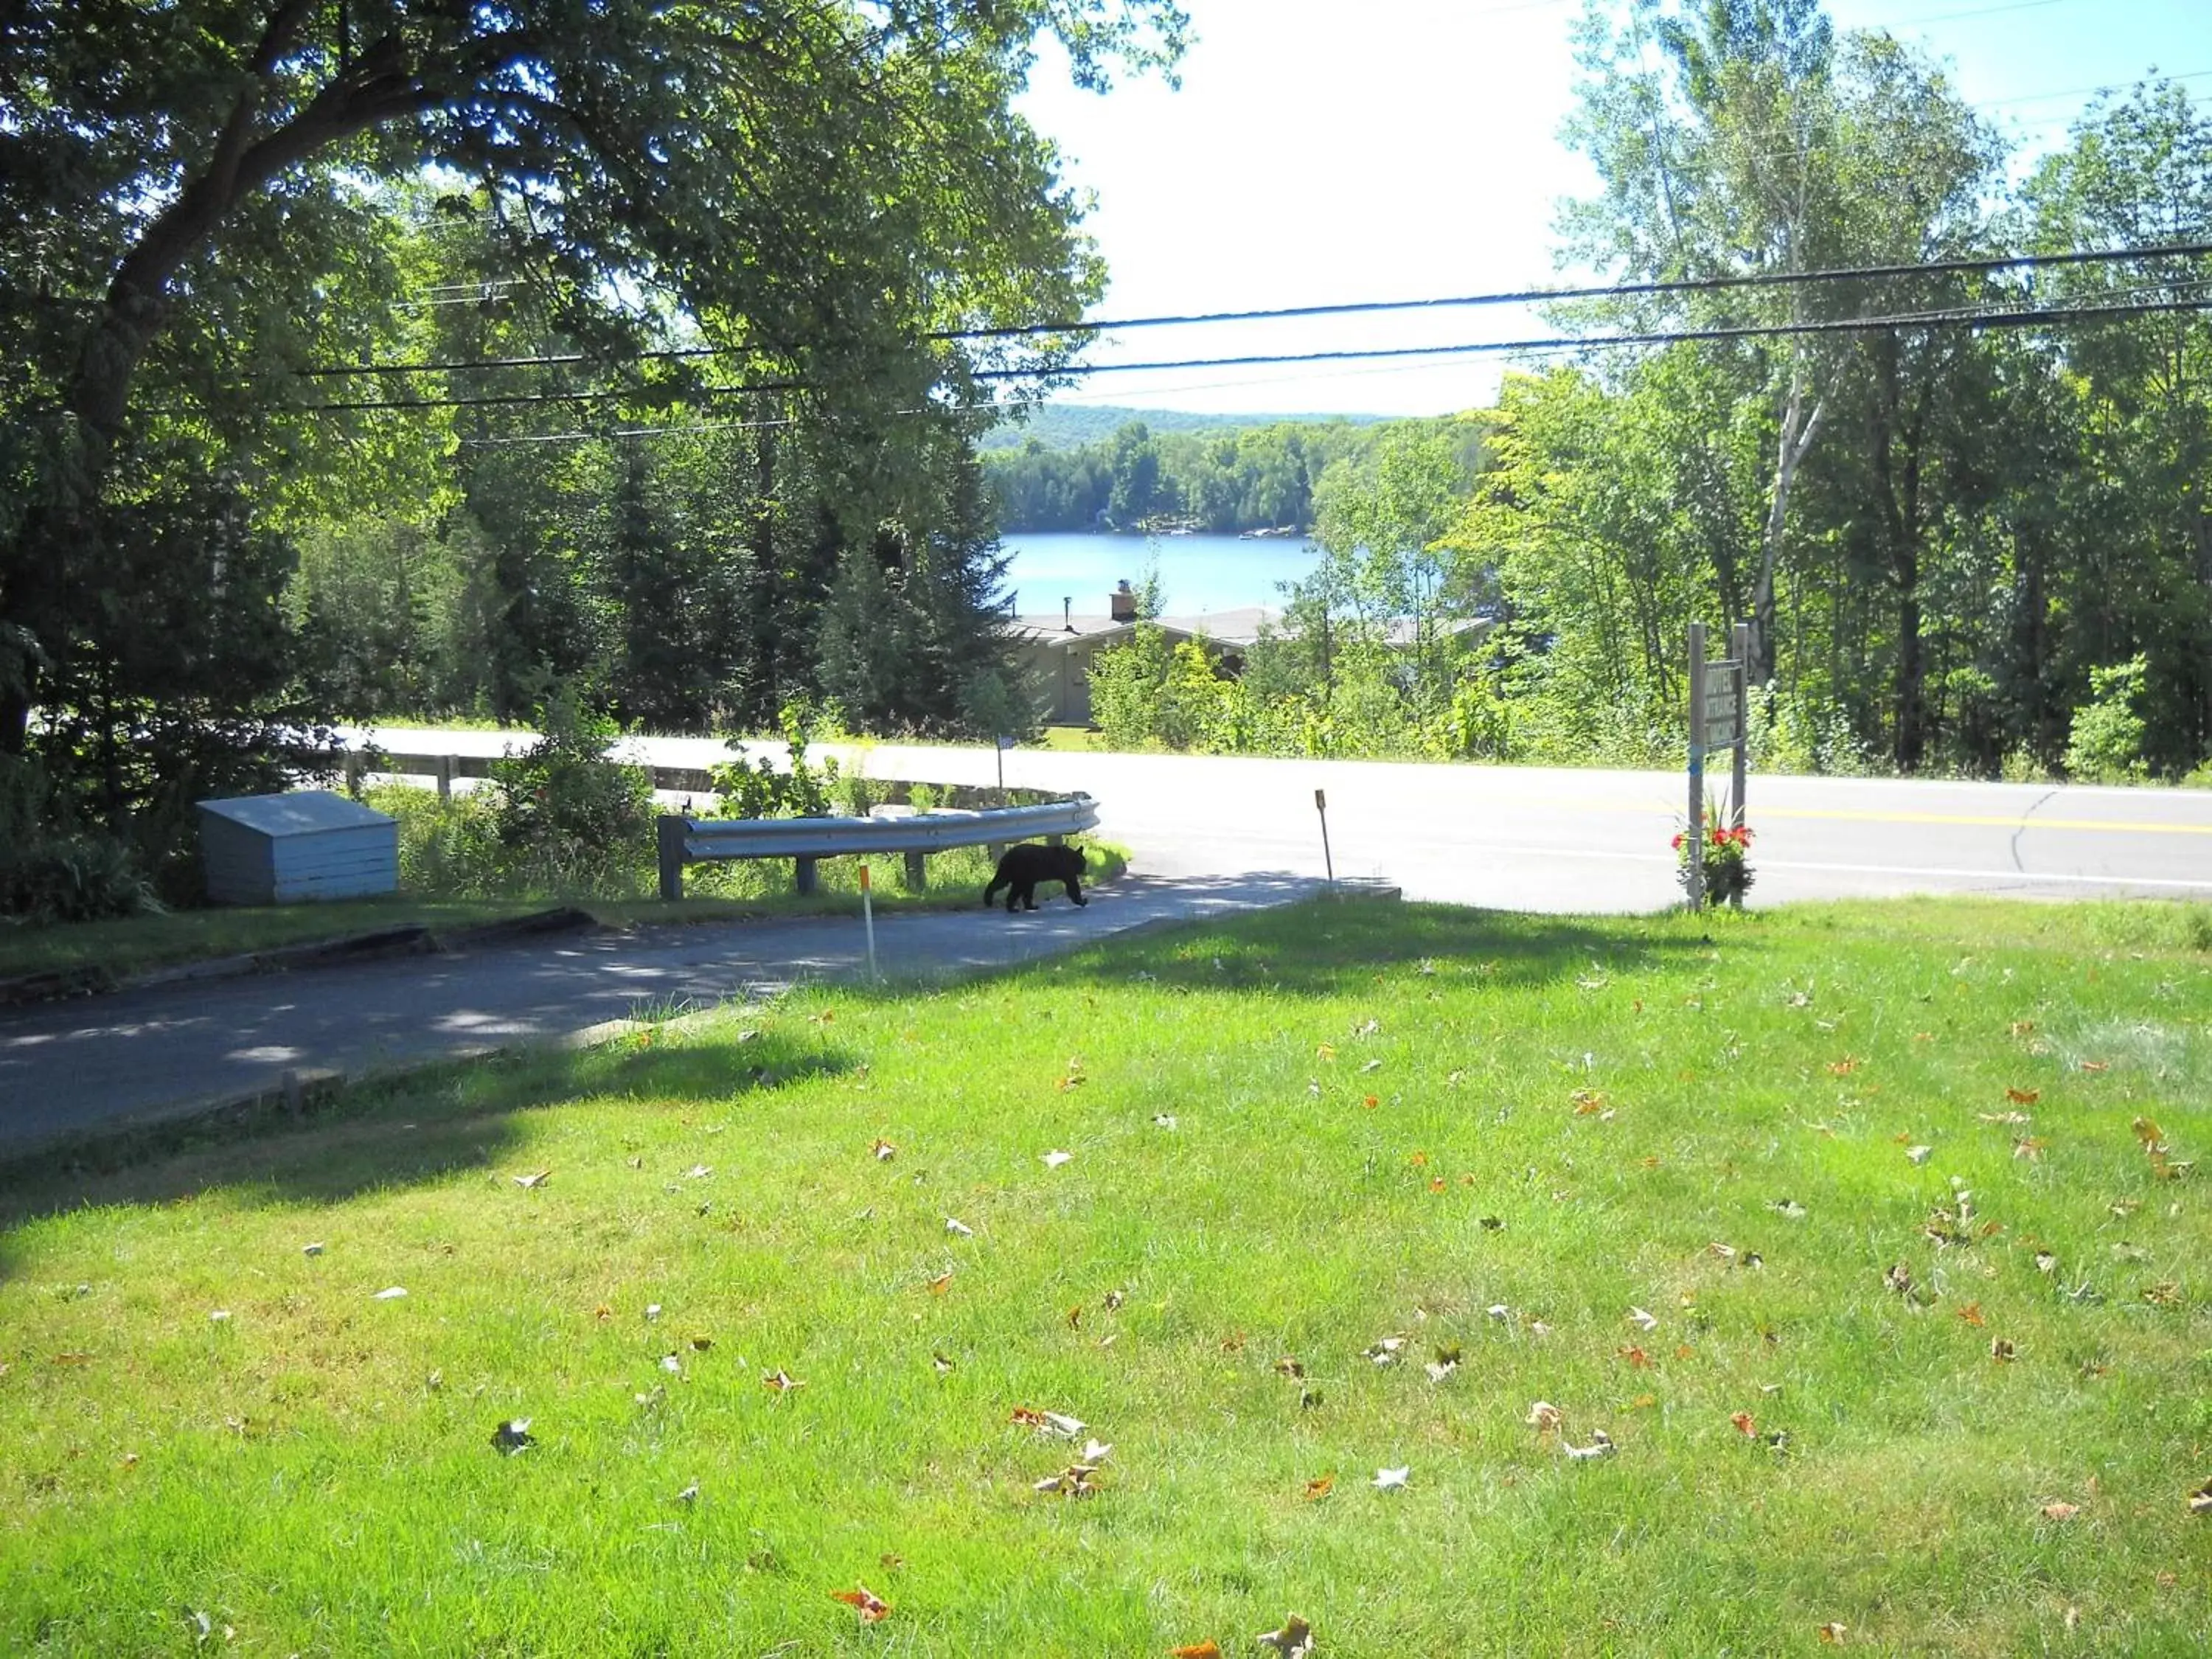 Area and facilities, Garden in Lakeview Motel